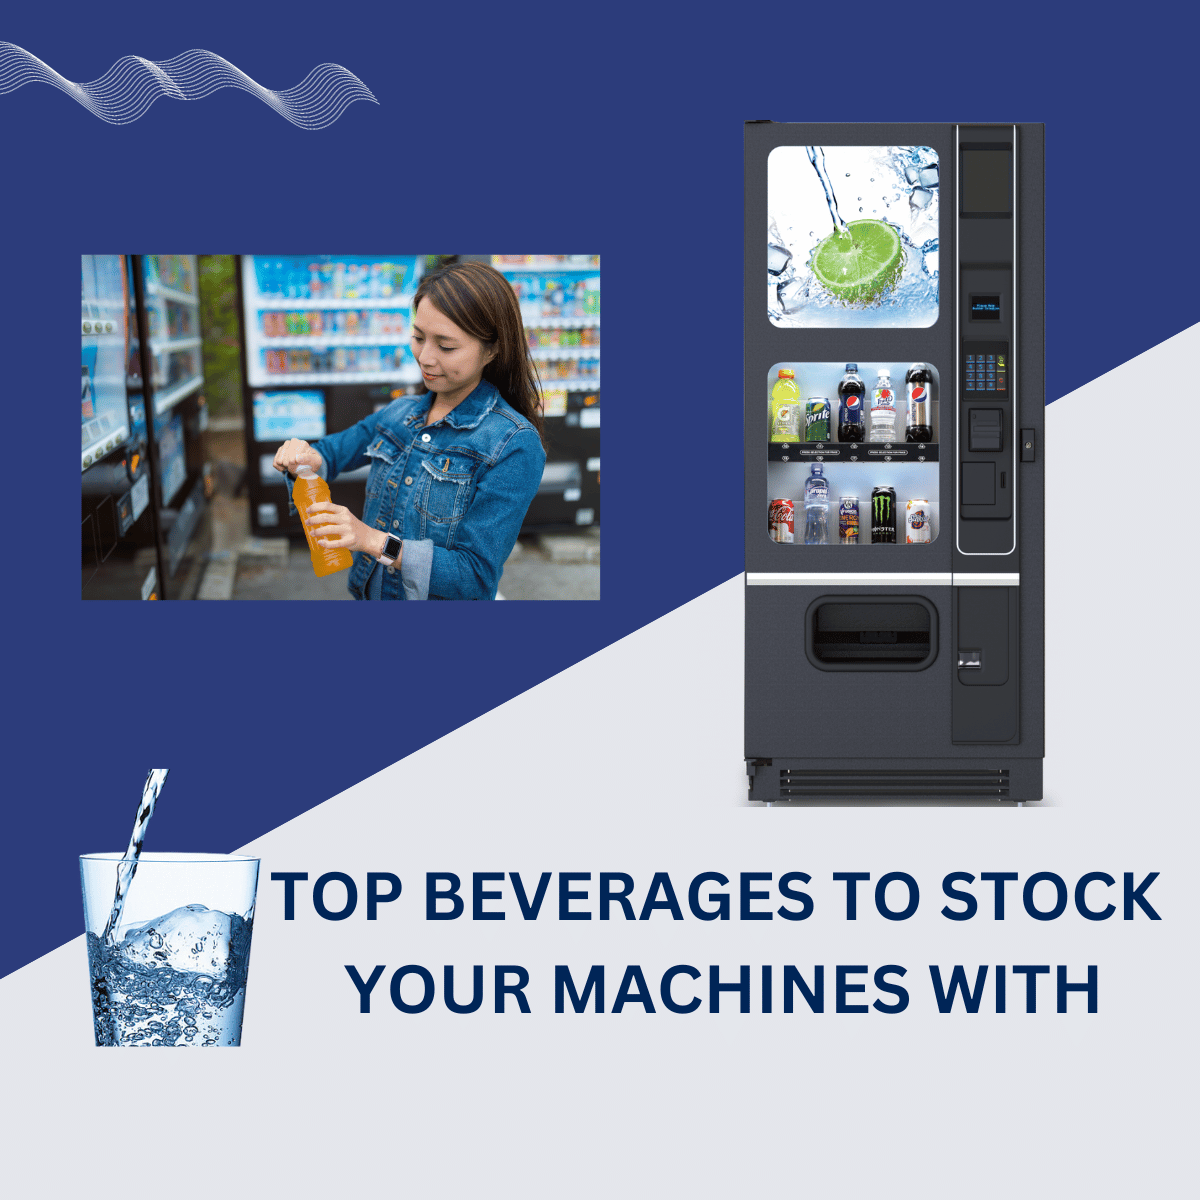 TOP BEVERAGES TO STOCK YOUR MACHINES WITH